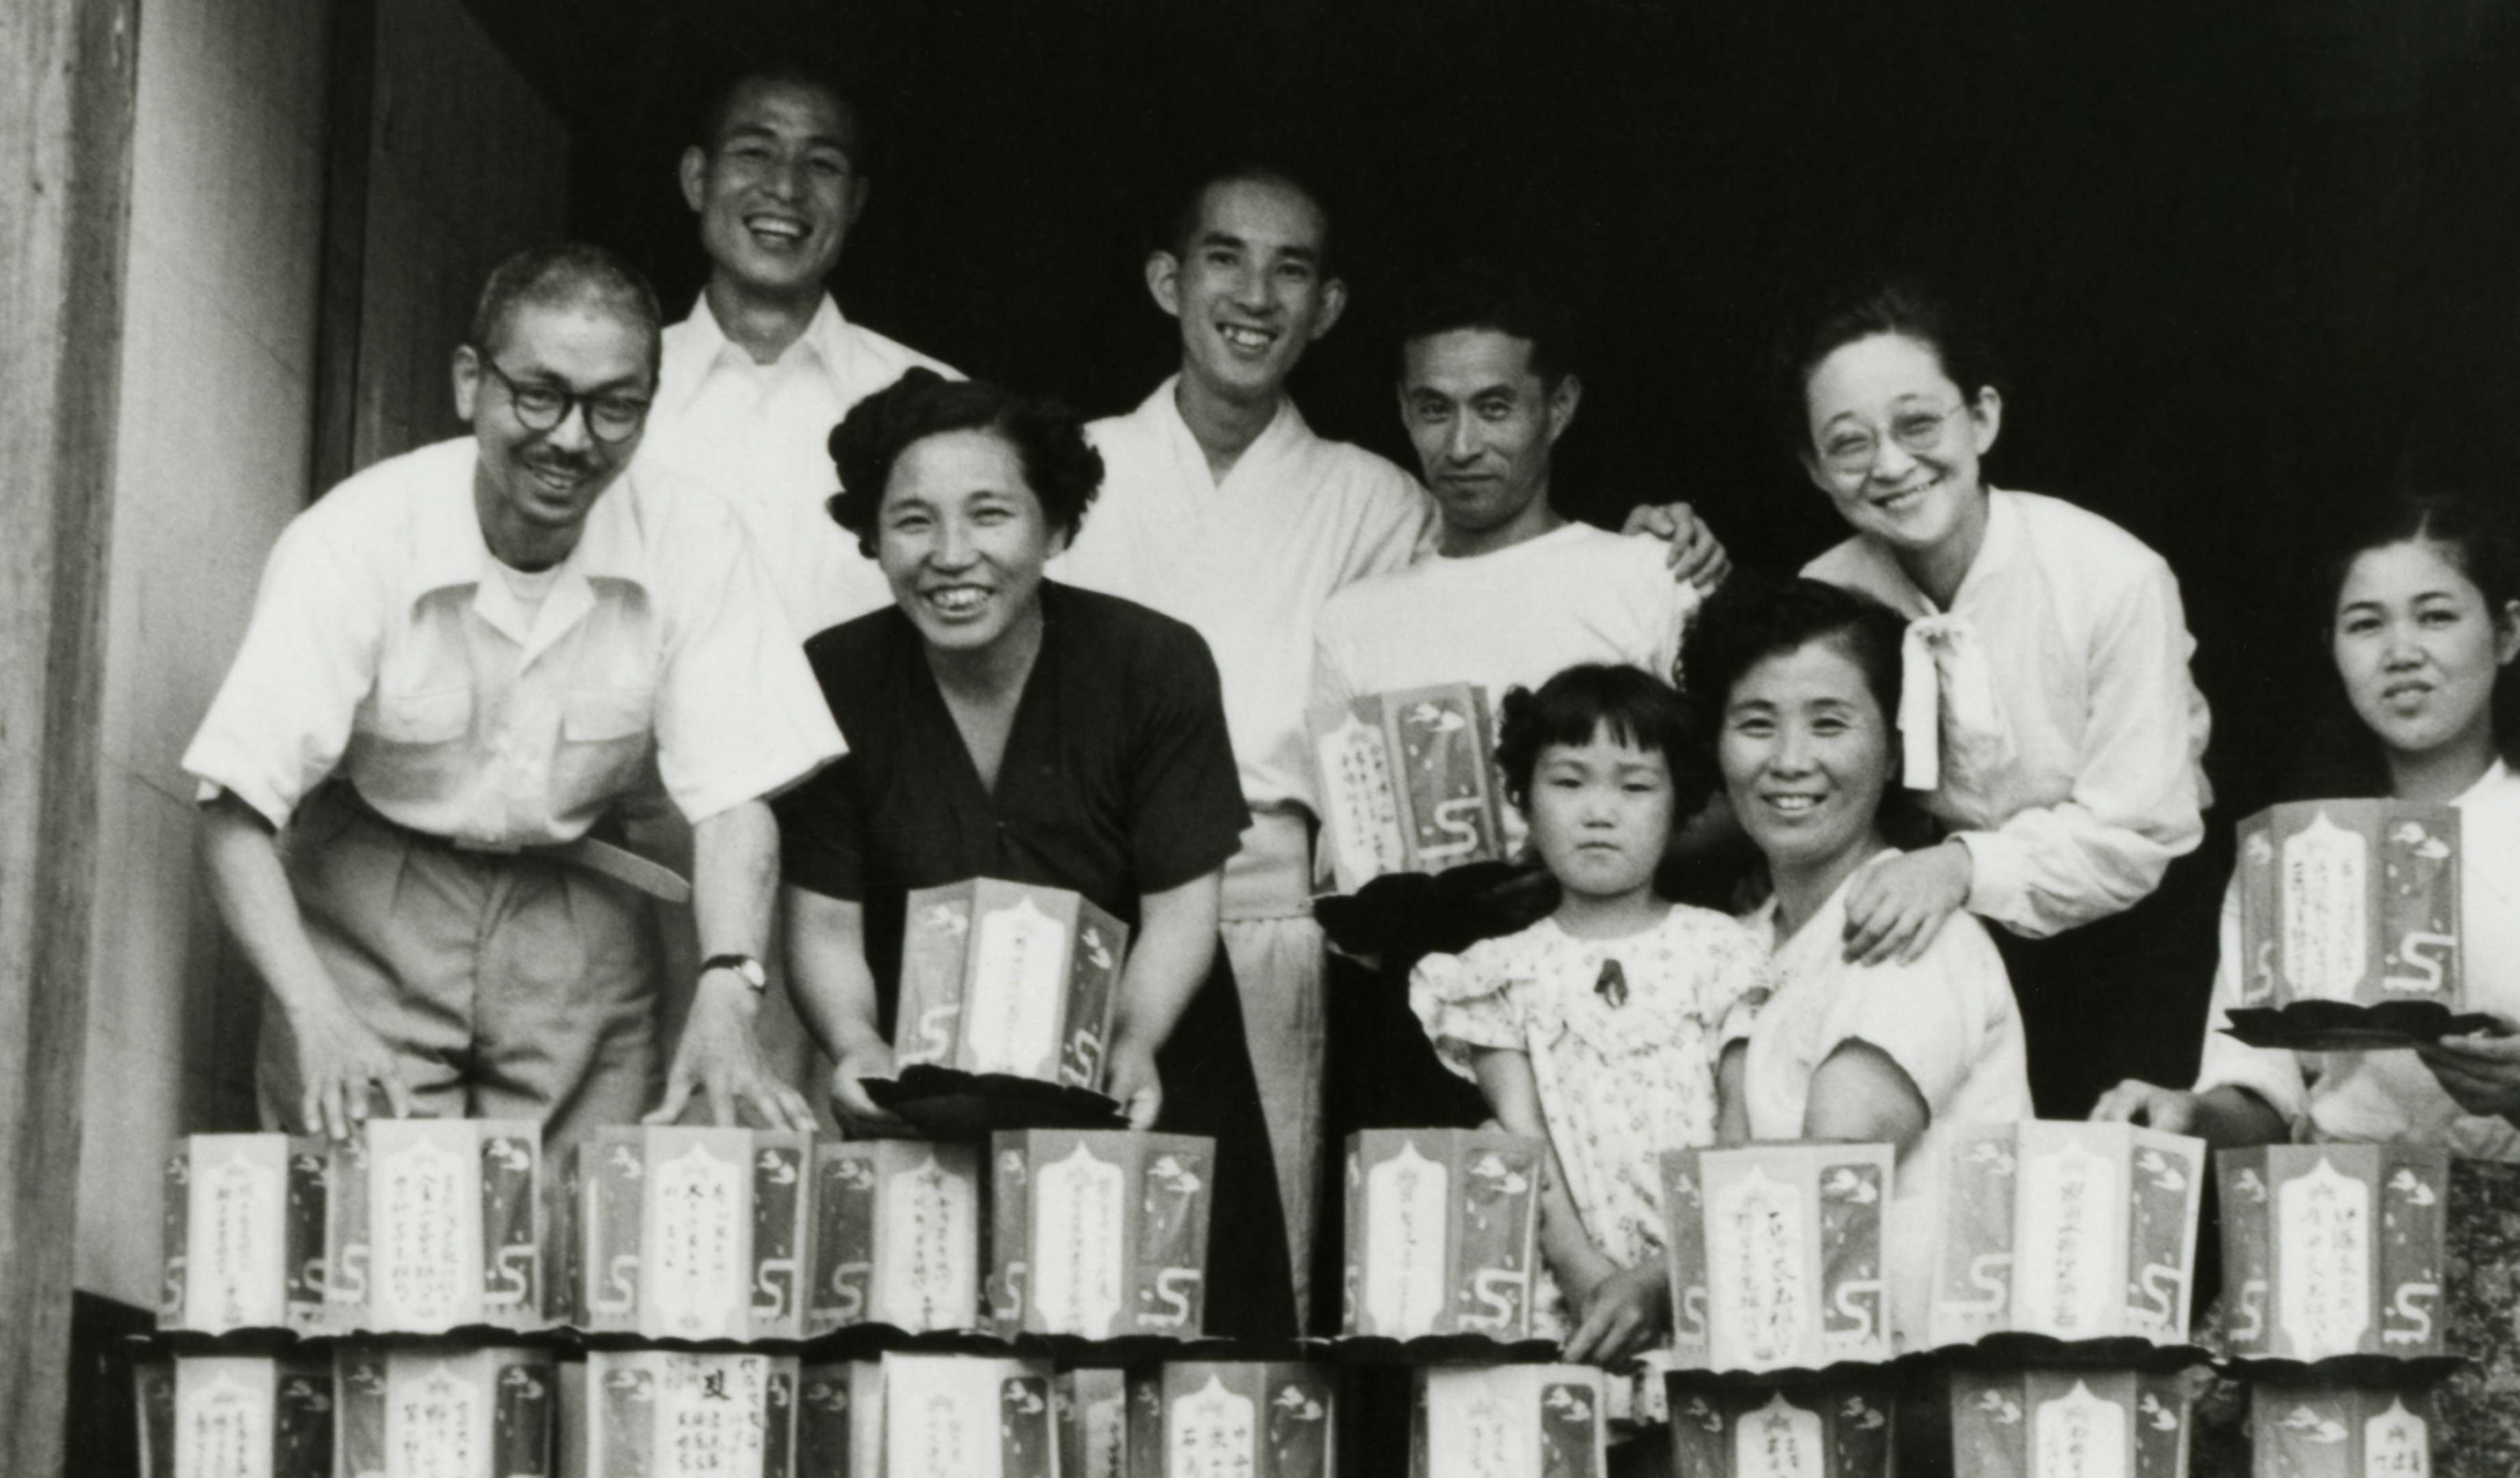 A beaming Shinjo and Tomoji, wearing lay clothes, pose for a portrait with a smiling group of men, women, and children preparing and stacking paper lanterns.